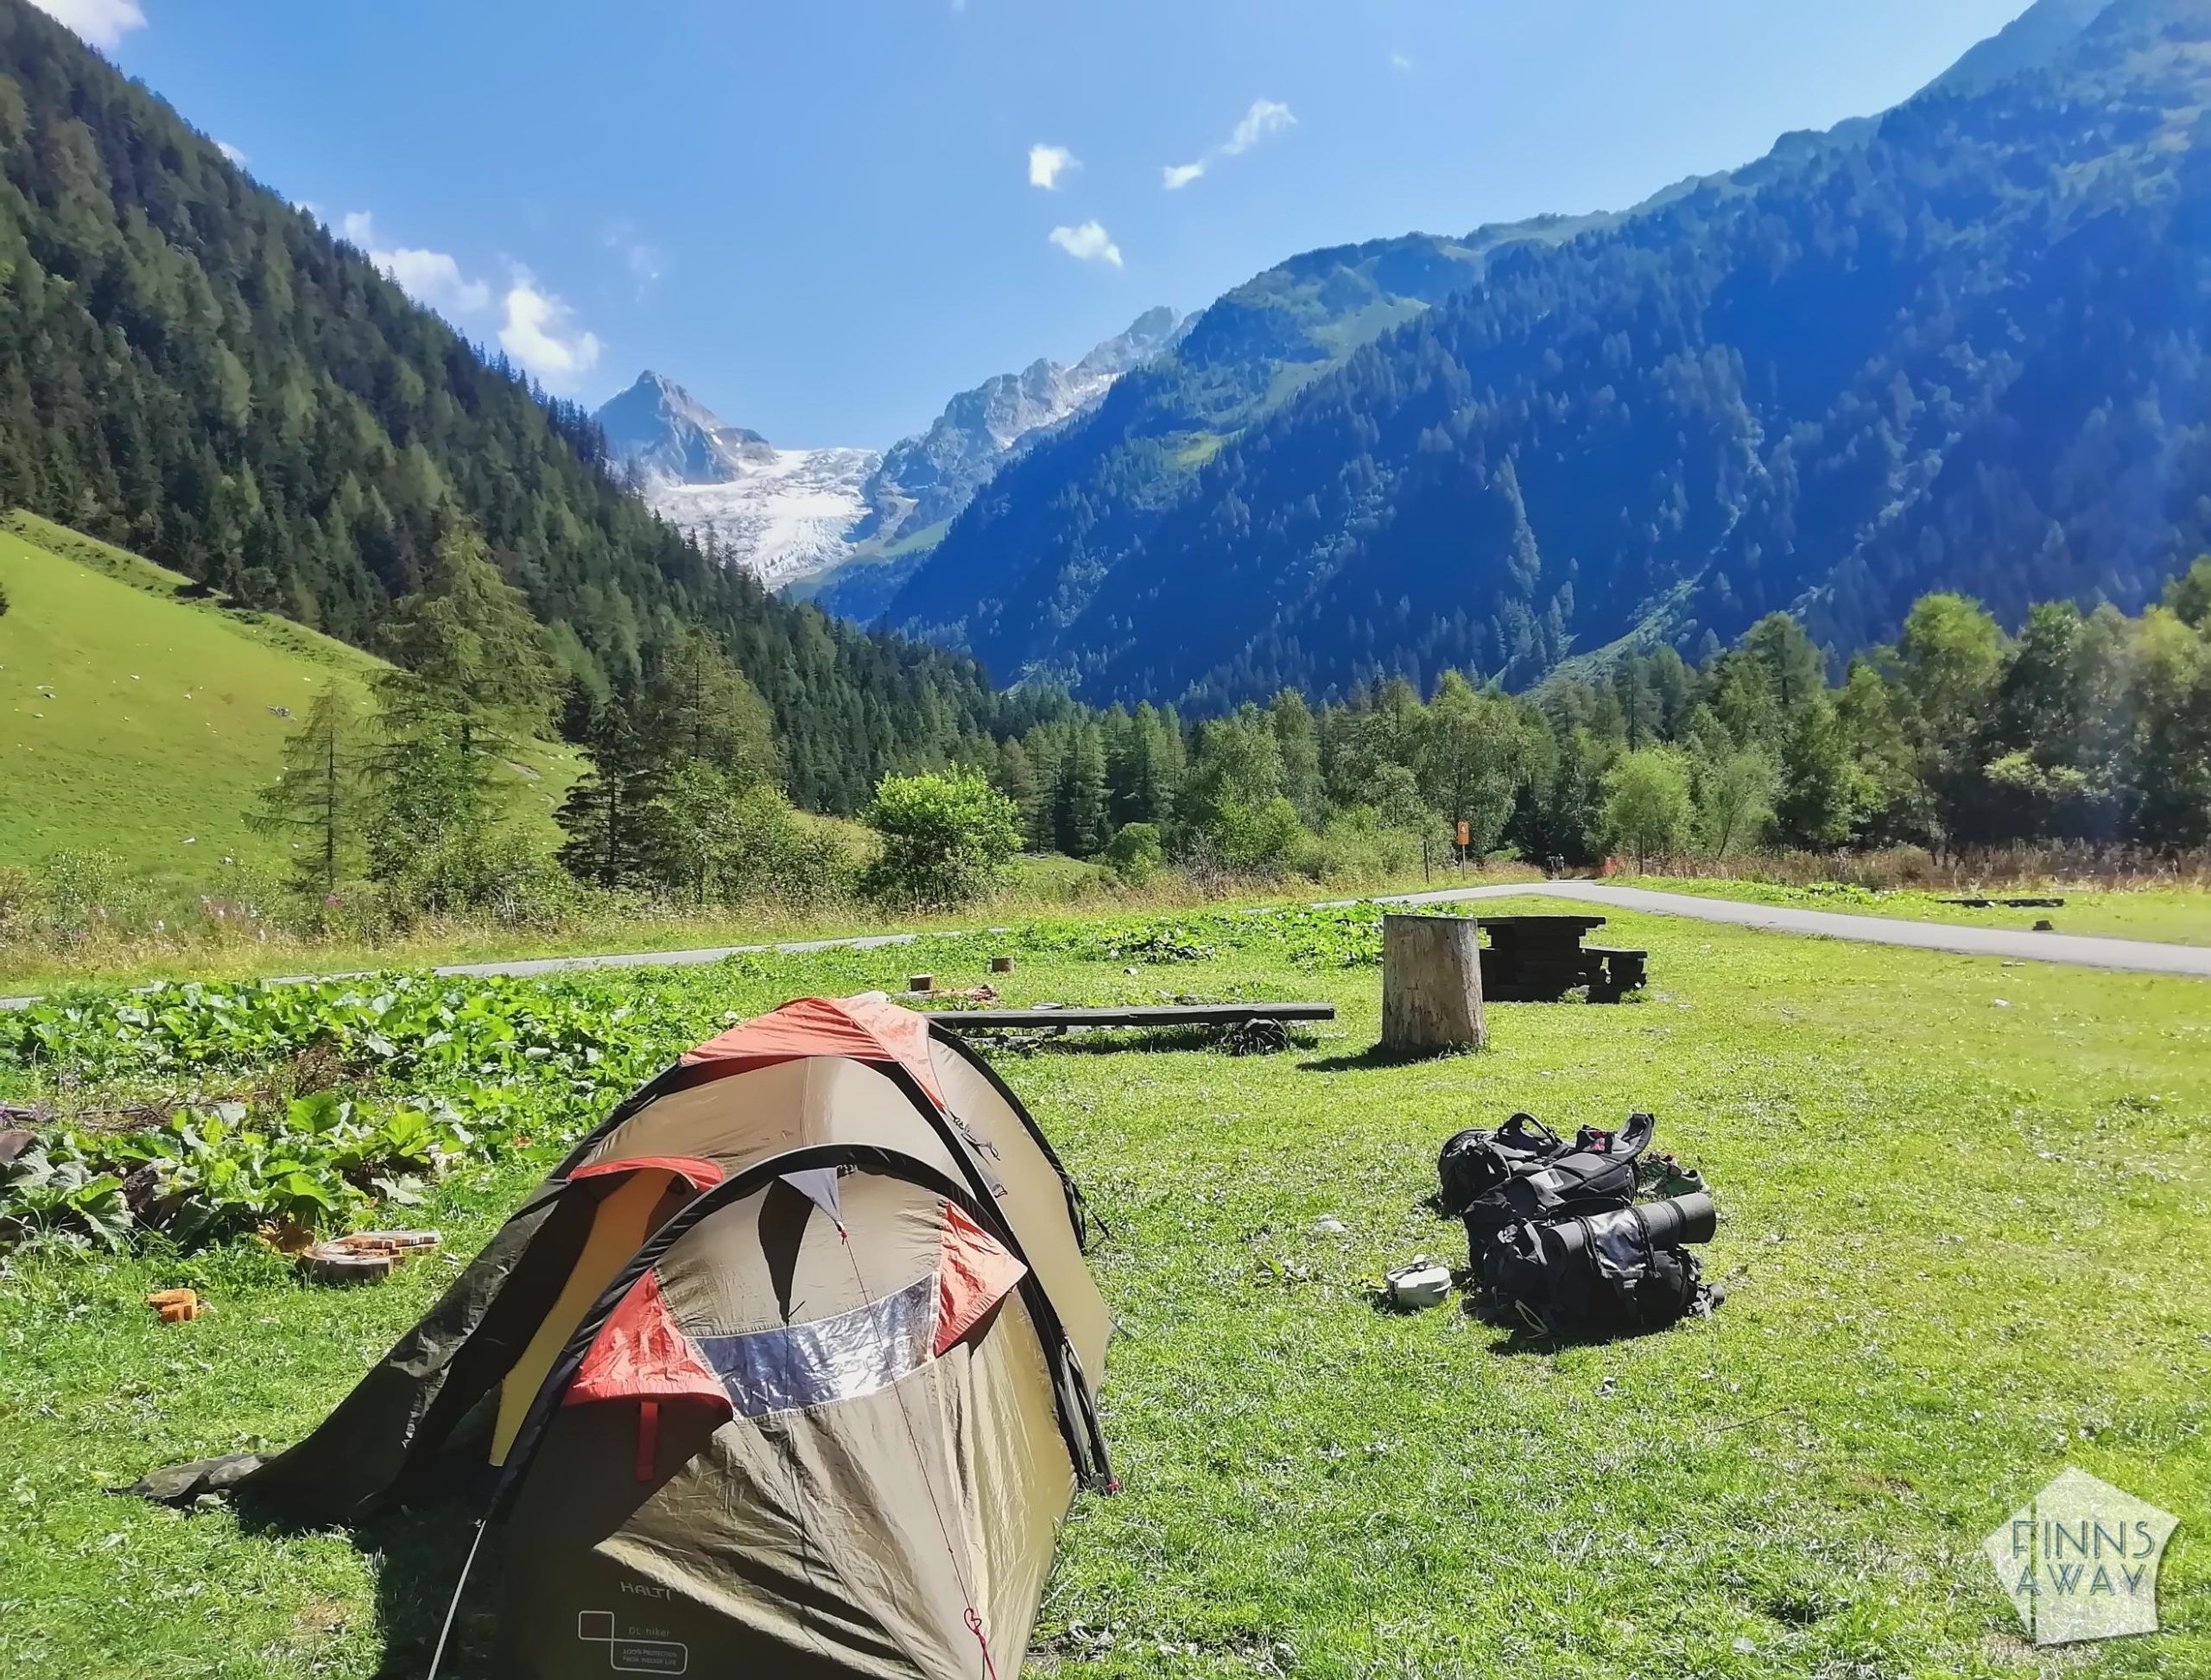 Camping Le Peuty | Hiking and camping Tour du Mont Blanc mountain trail in the Alps | FinnsAway travel blog